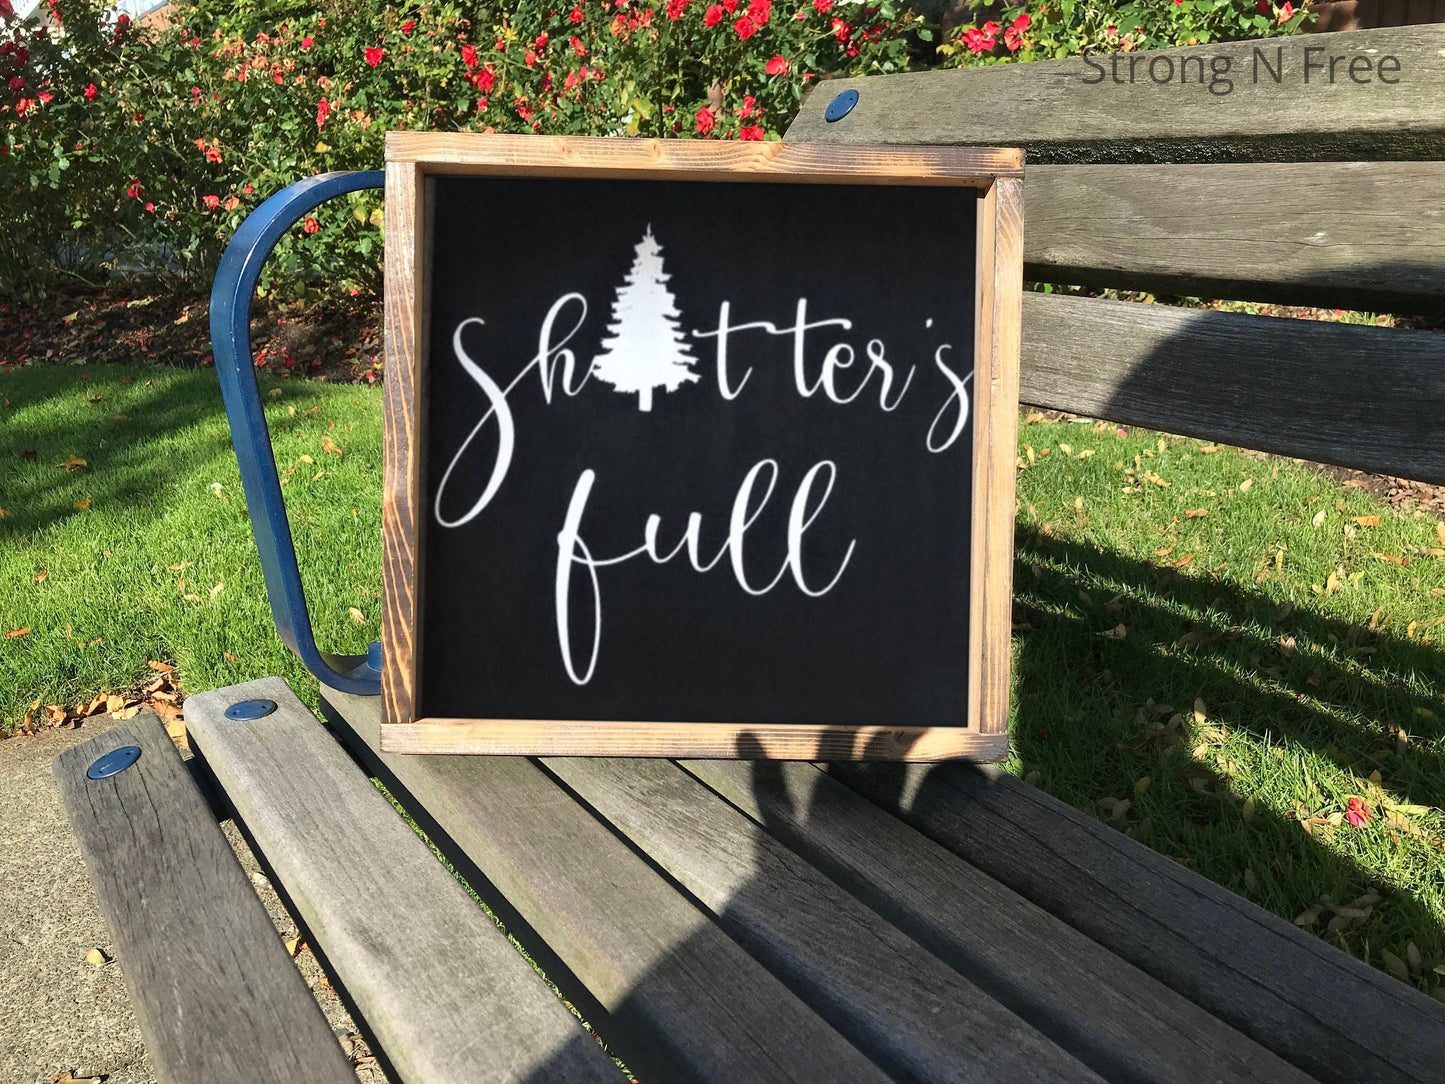 shitters full clark - Christmas sign - cousin Eddie - humor - funny quotes - handmade signs - farmhouse Christmas - gift for him